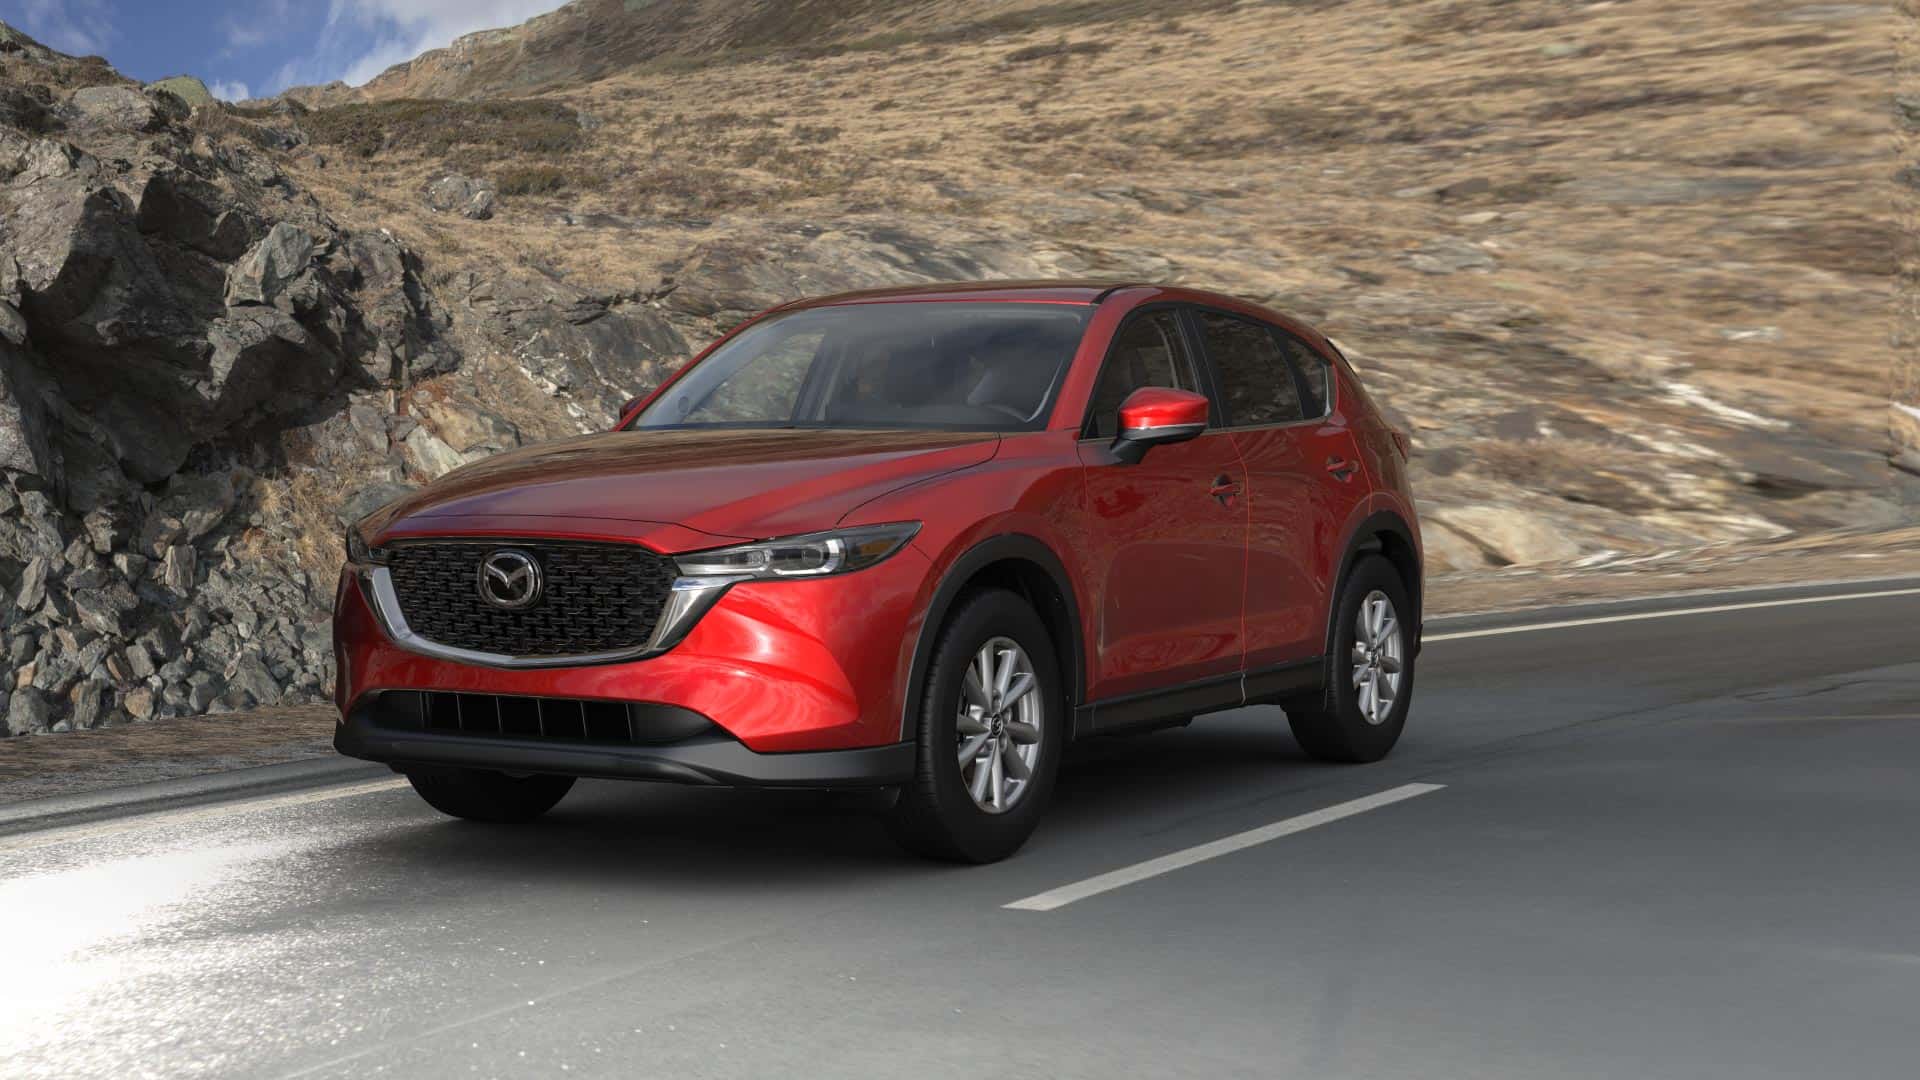 2023 Mazda CX-5 2.5 S Select Soul Red Crystal Metallic | Passport Mazda in Suitland MD